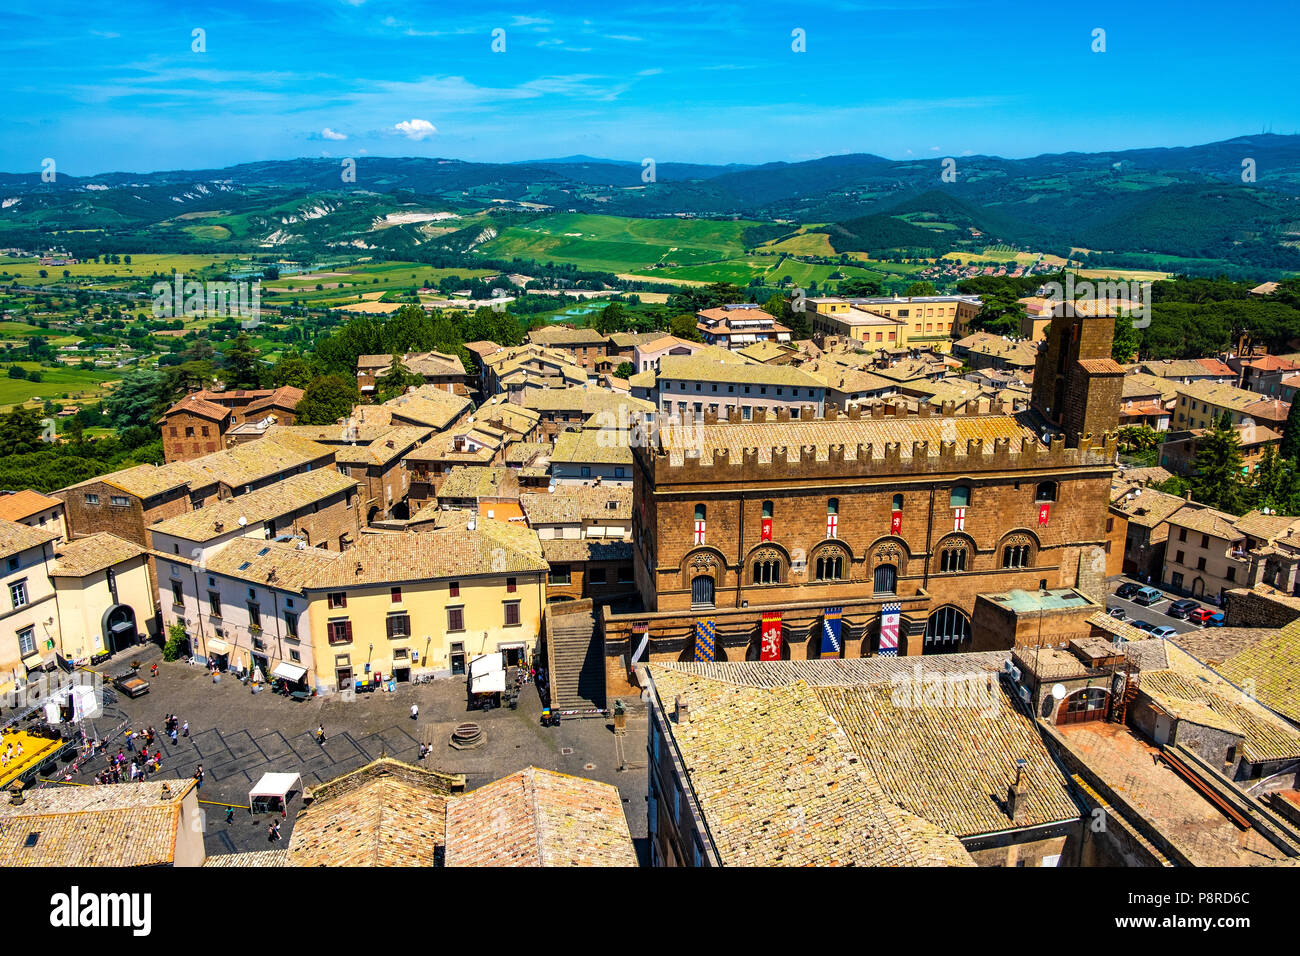 Orvieto, Umbria / Italy - 2018/05/26: Panoramic view of Orvieto old town and Umbria region with Piazza Vivaria square and Palazzo del Popolo palace Stock Photo